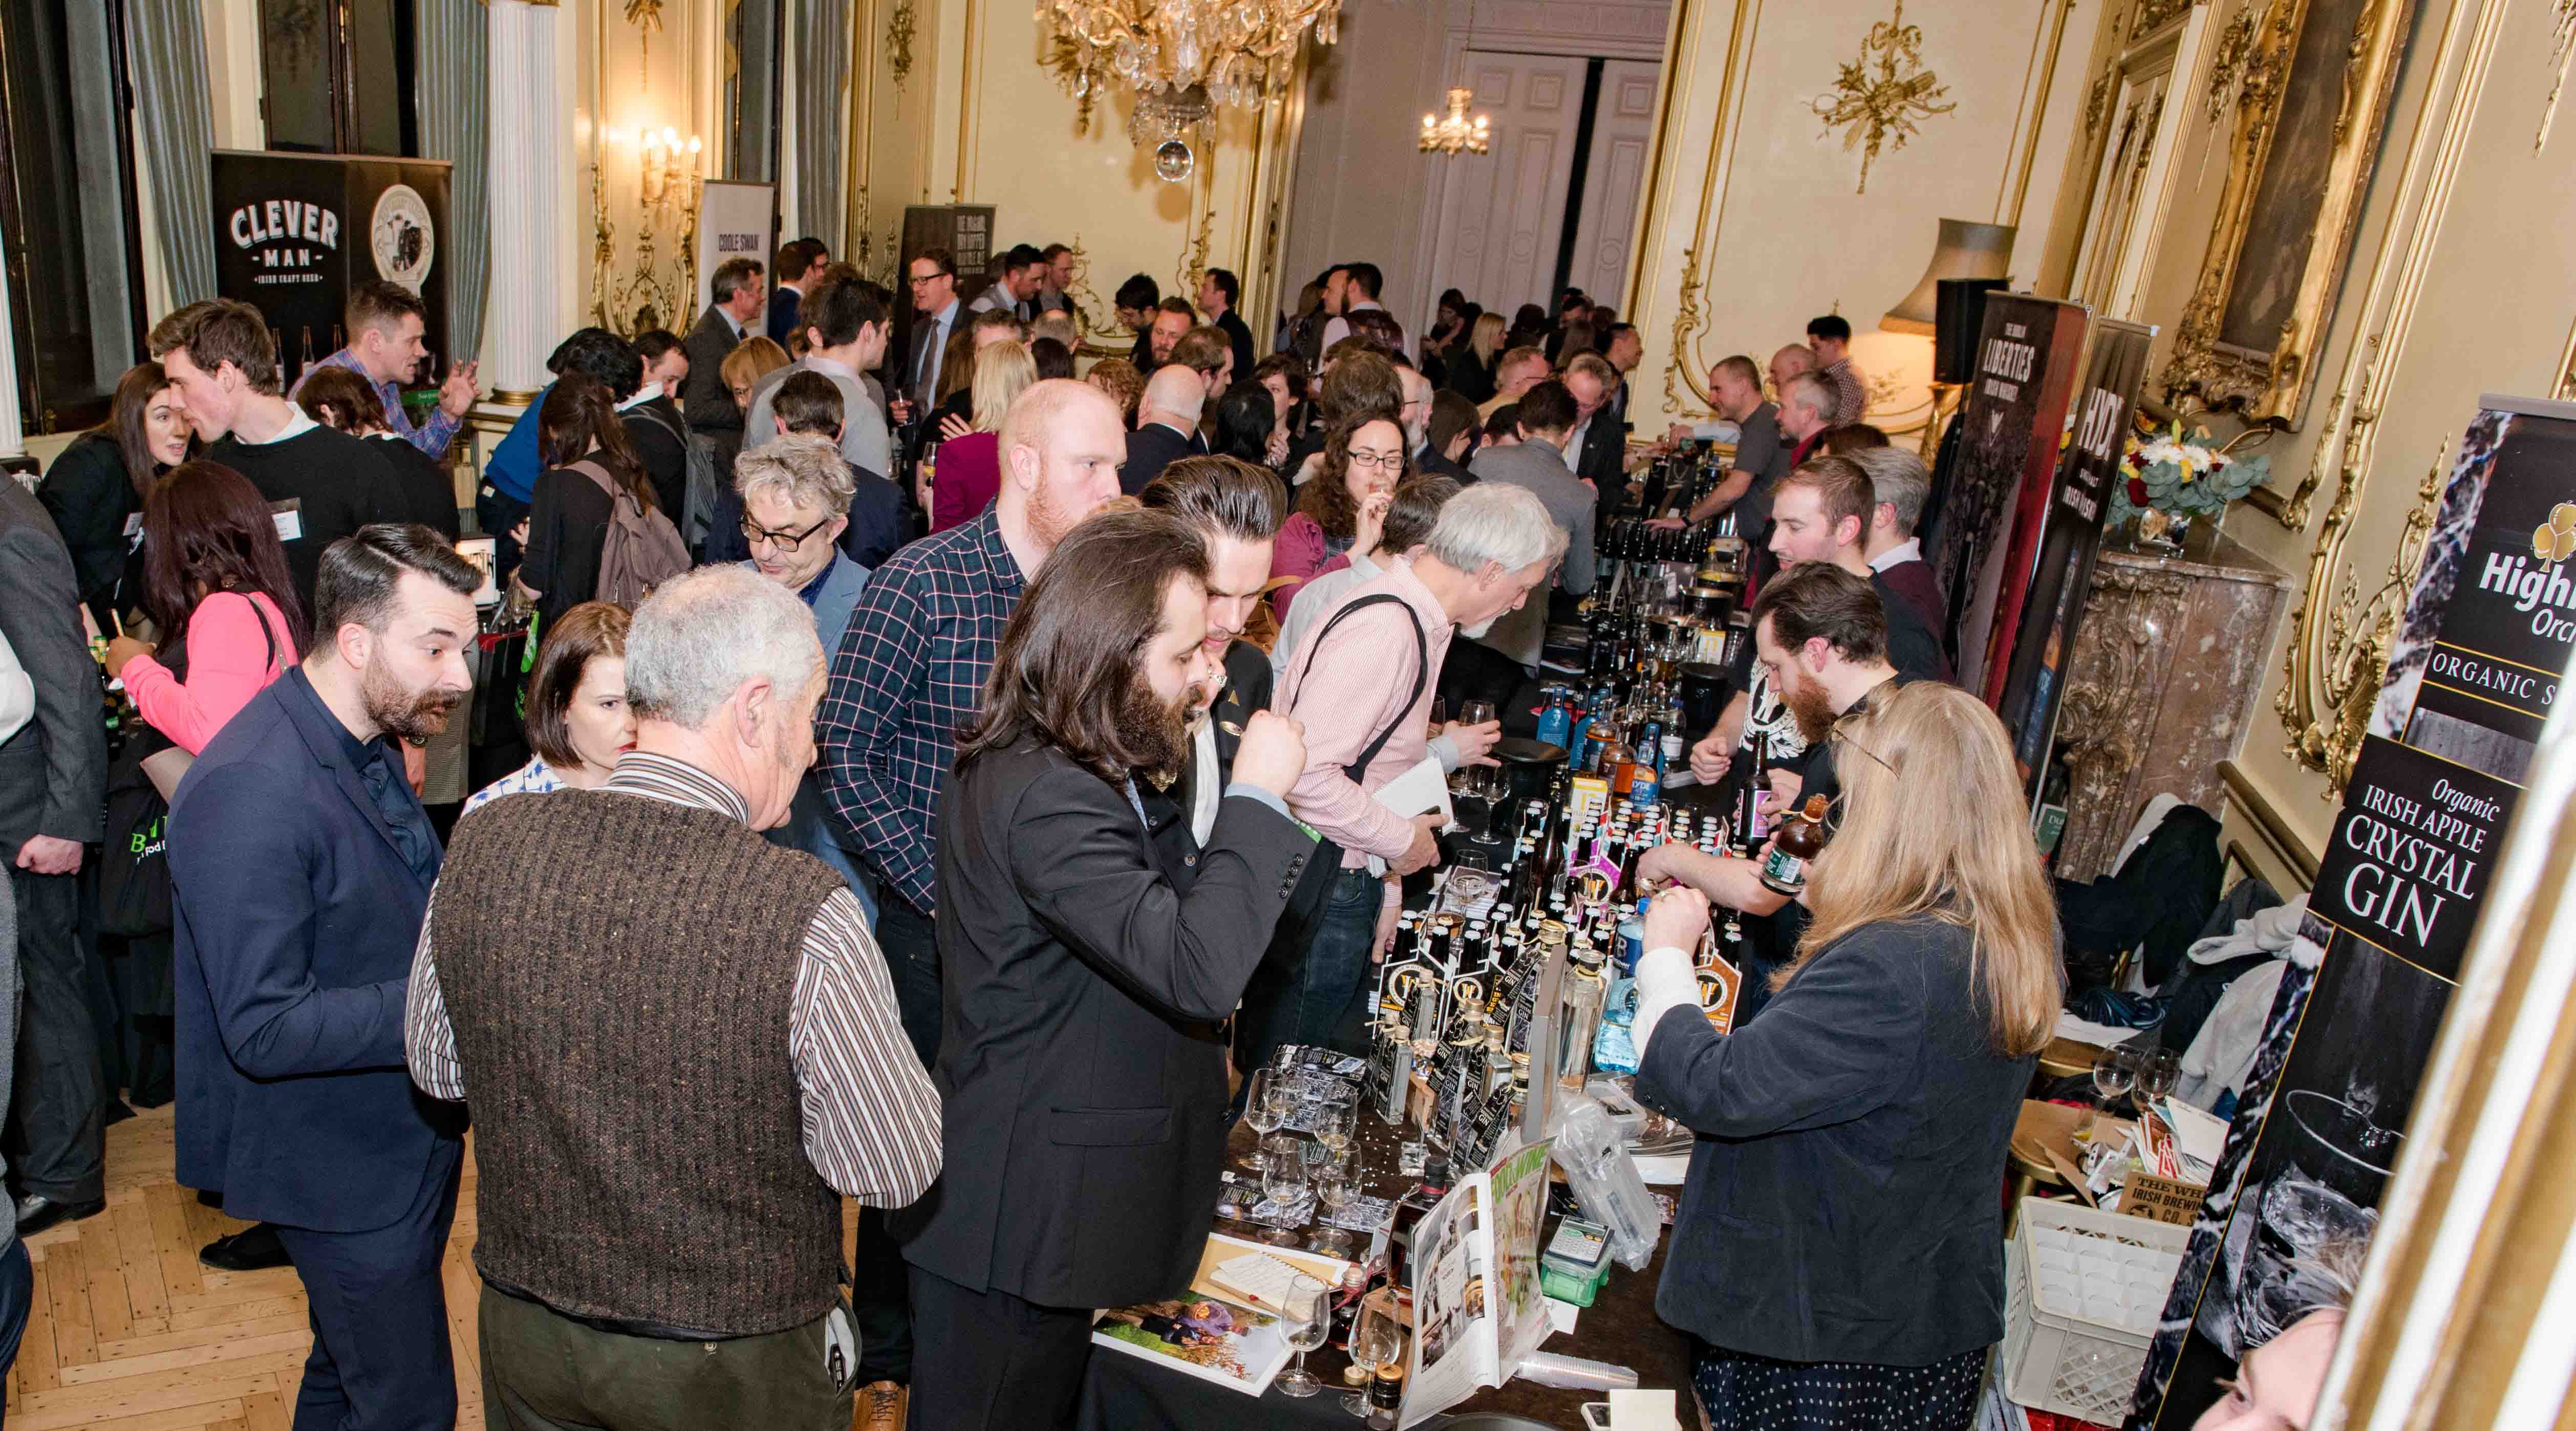 Last week’s ‘Spirit of Sharing’ event in London hopes to increase awareness among UK retailers, distributors, food & drink writers and bloggers of the growing Irish drinks industry. 